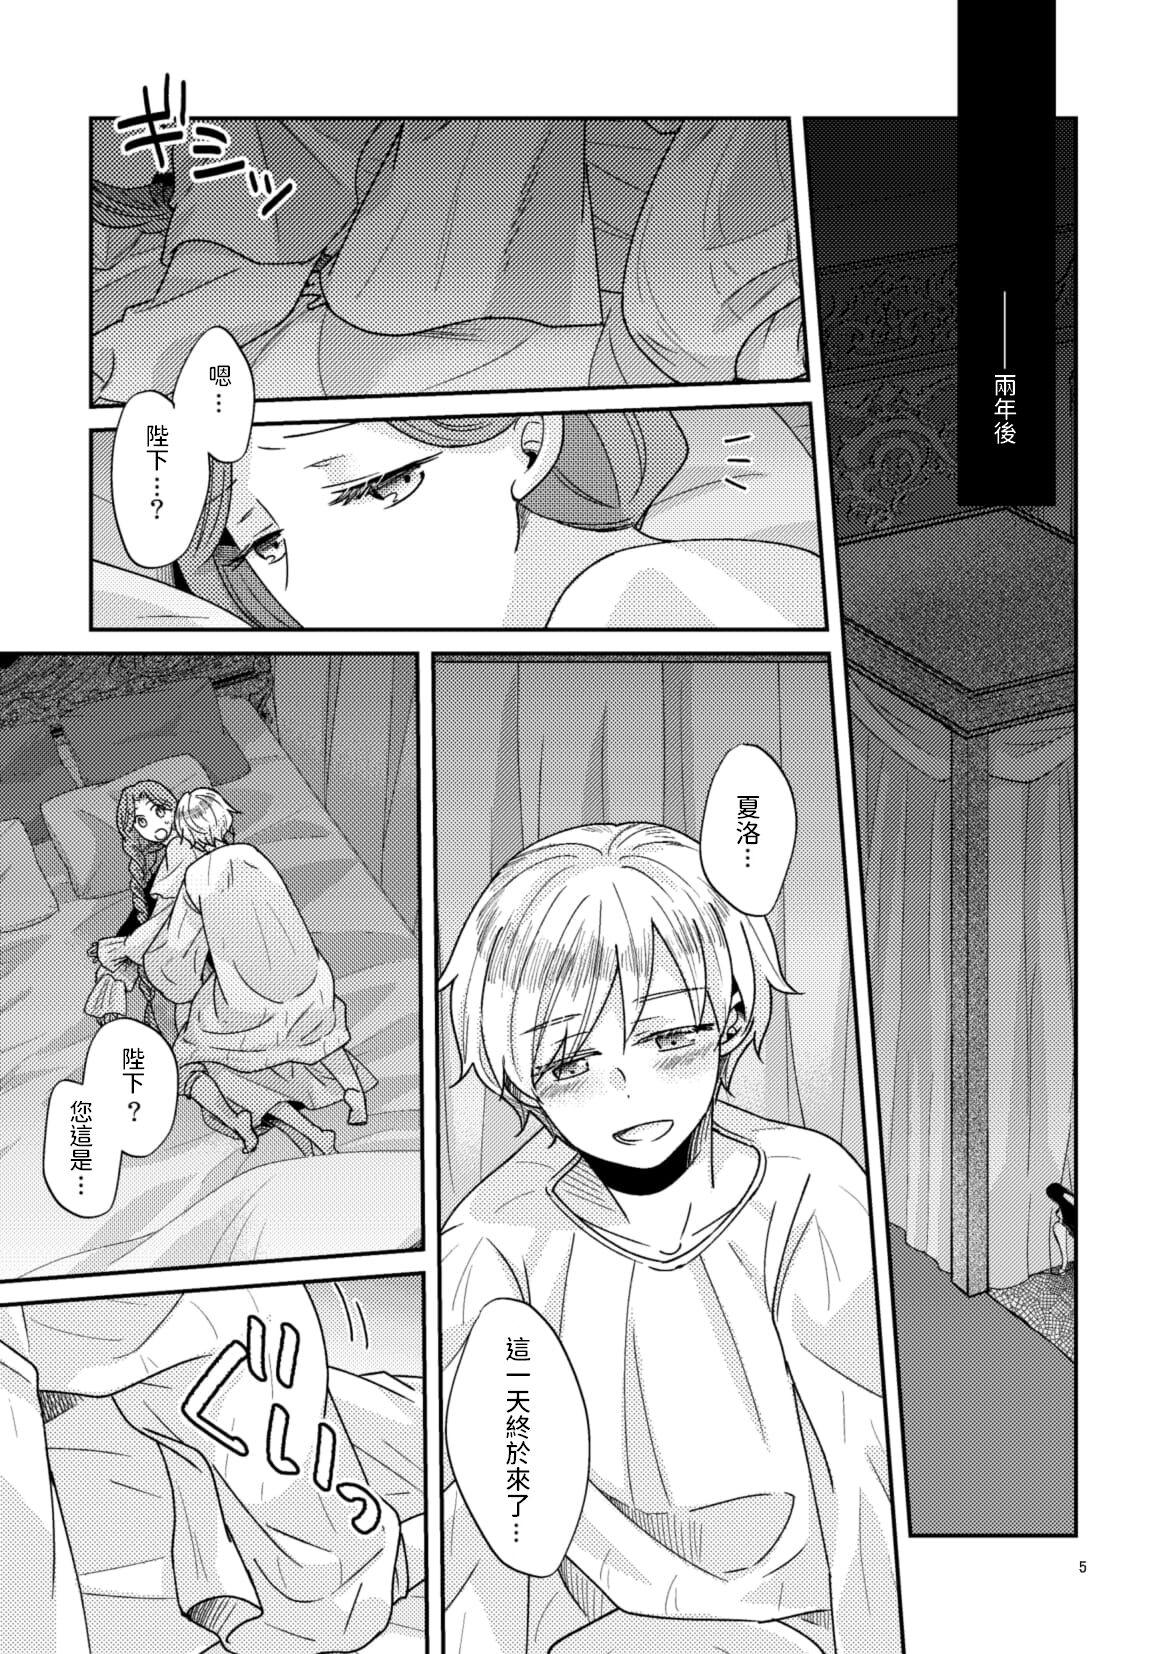 Shecock 少年王と年上王妃 中文翻譯 Load - Page 7